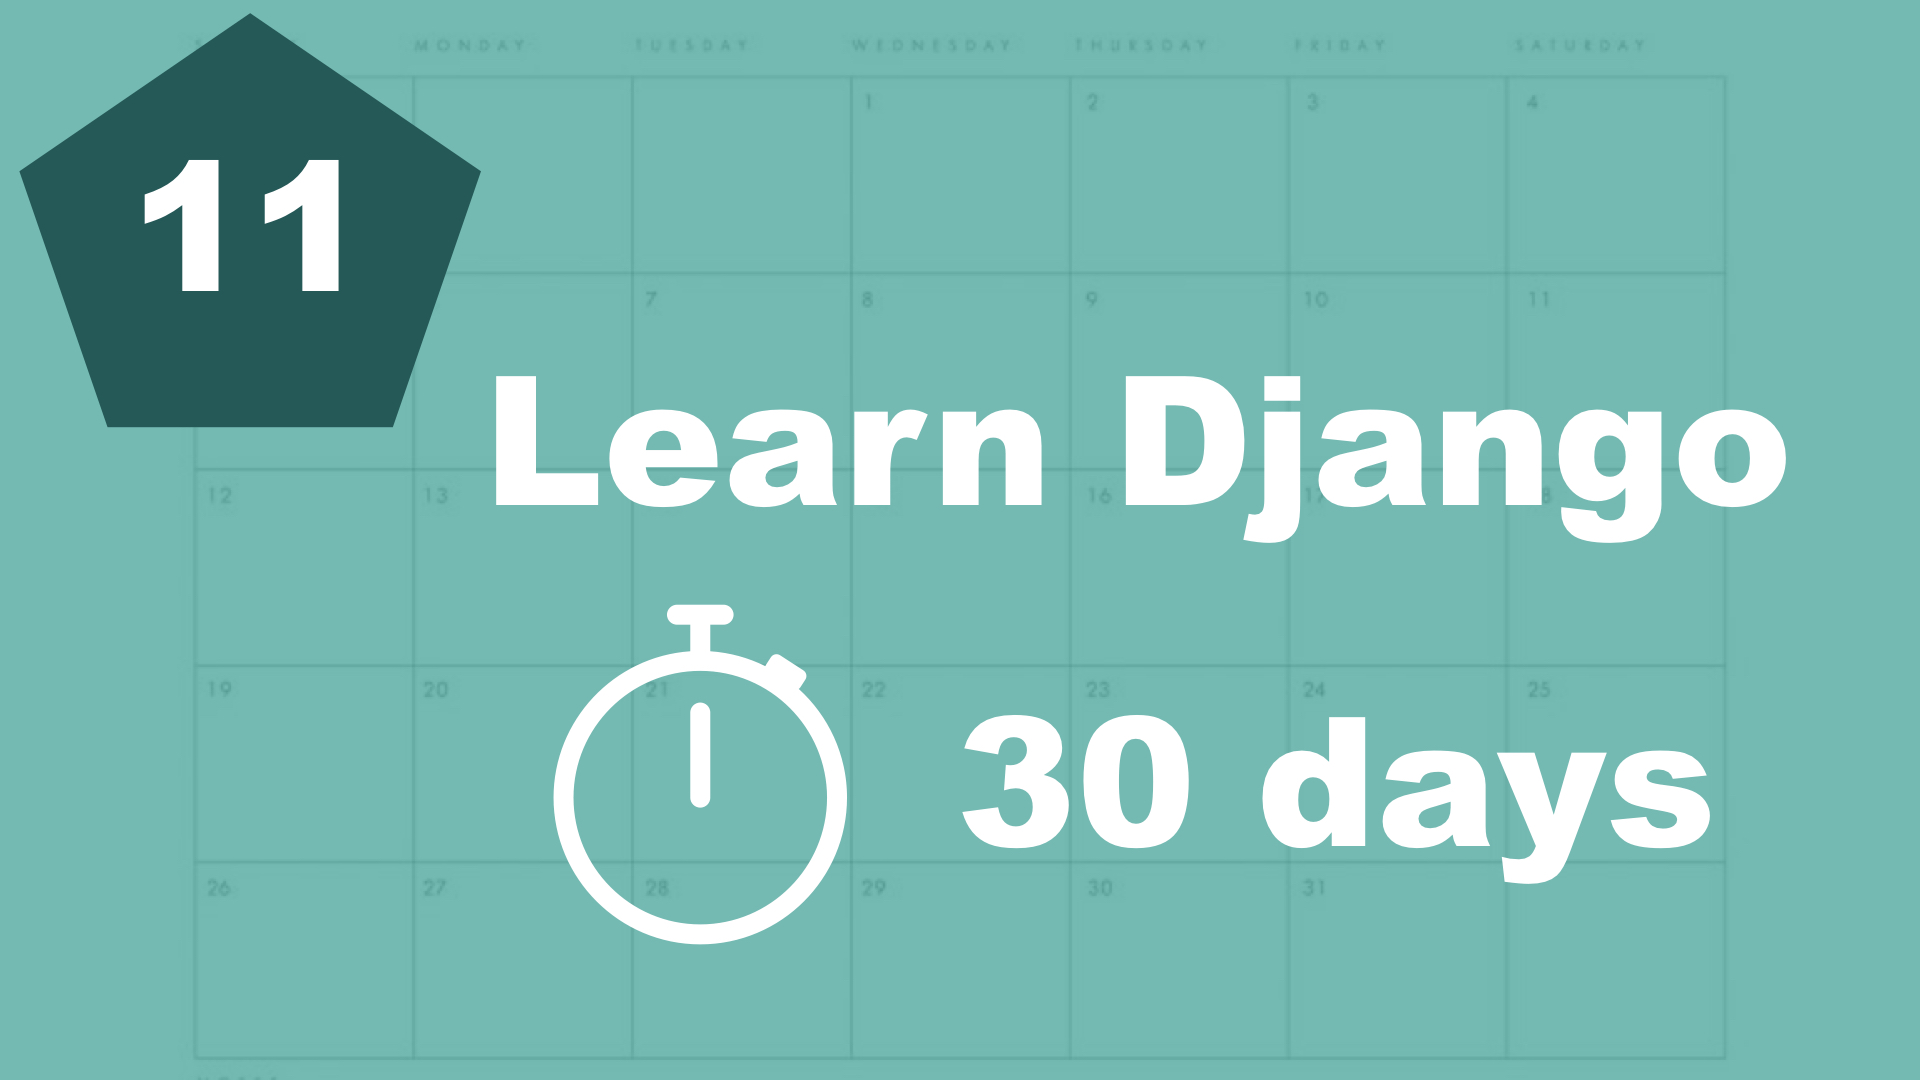 Showing contents from the model - 30 days of Django